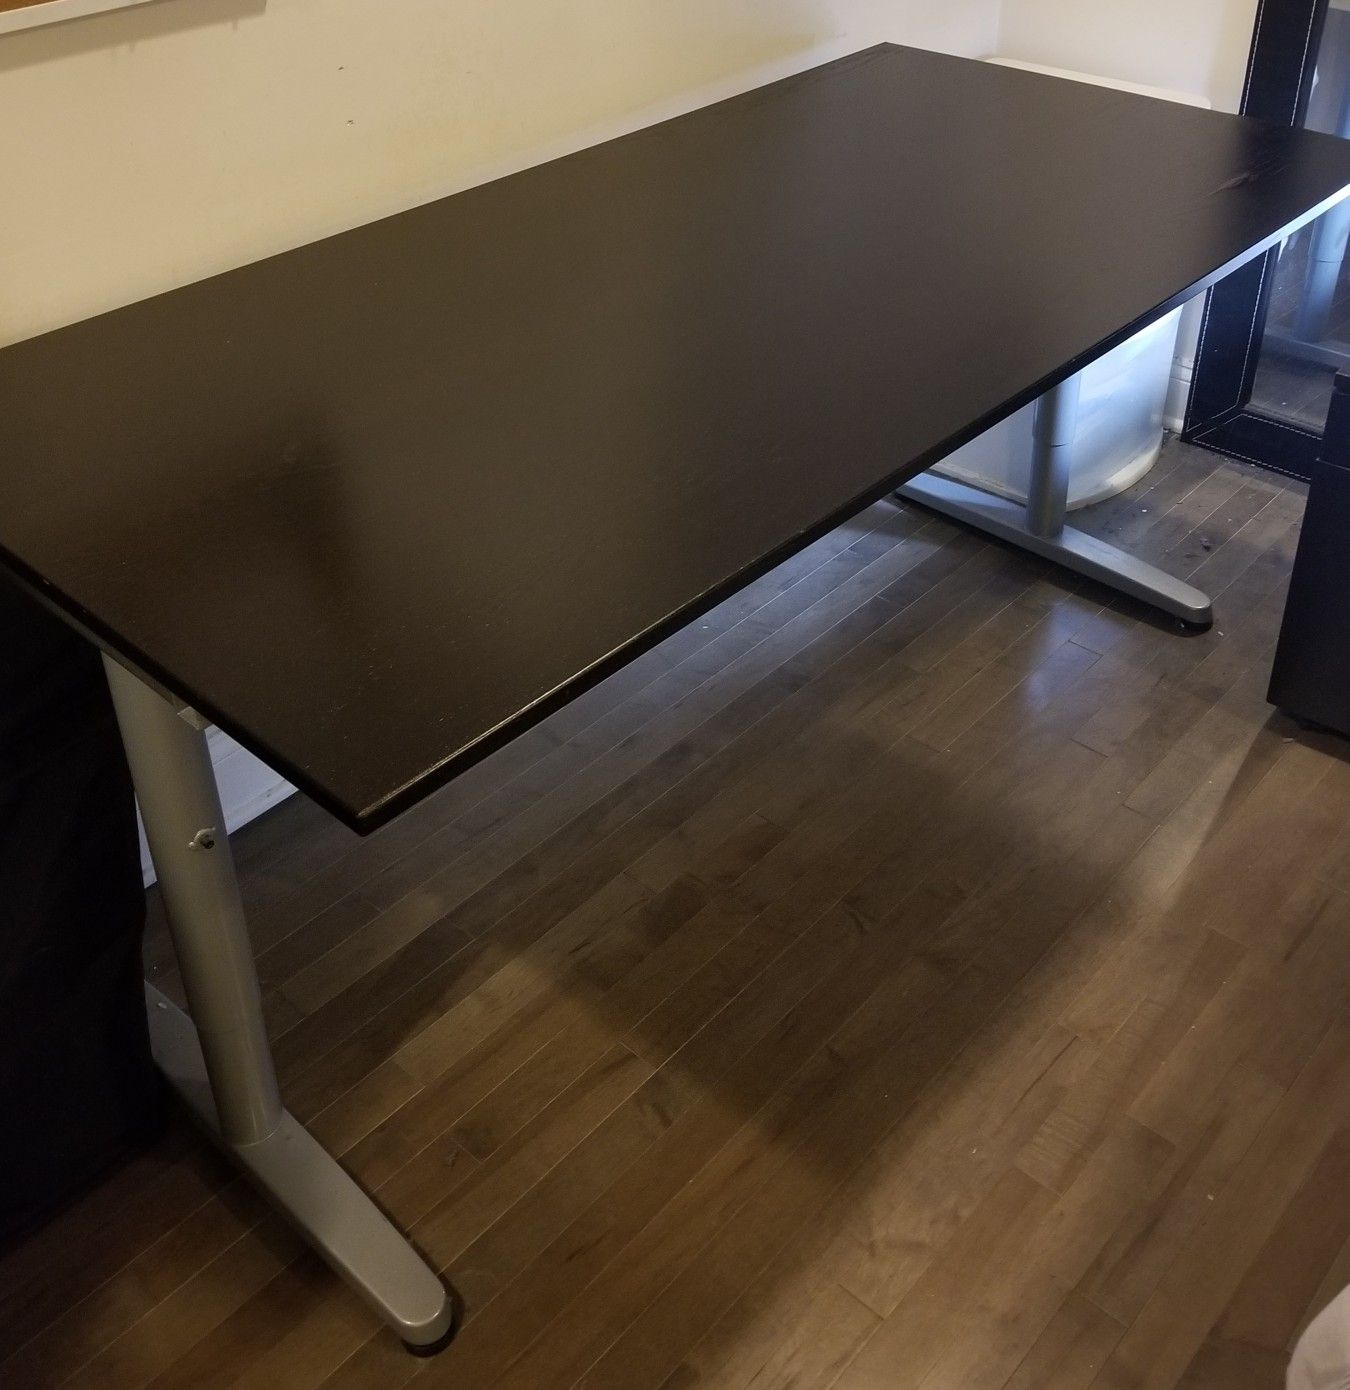 Ikea 30x 60 in. Table top desk w/ Chair. 6months old. Available for pickup. Cash Only.